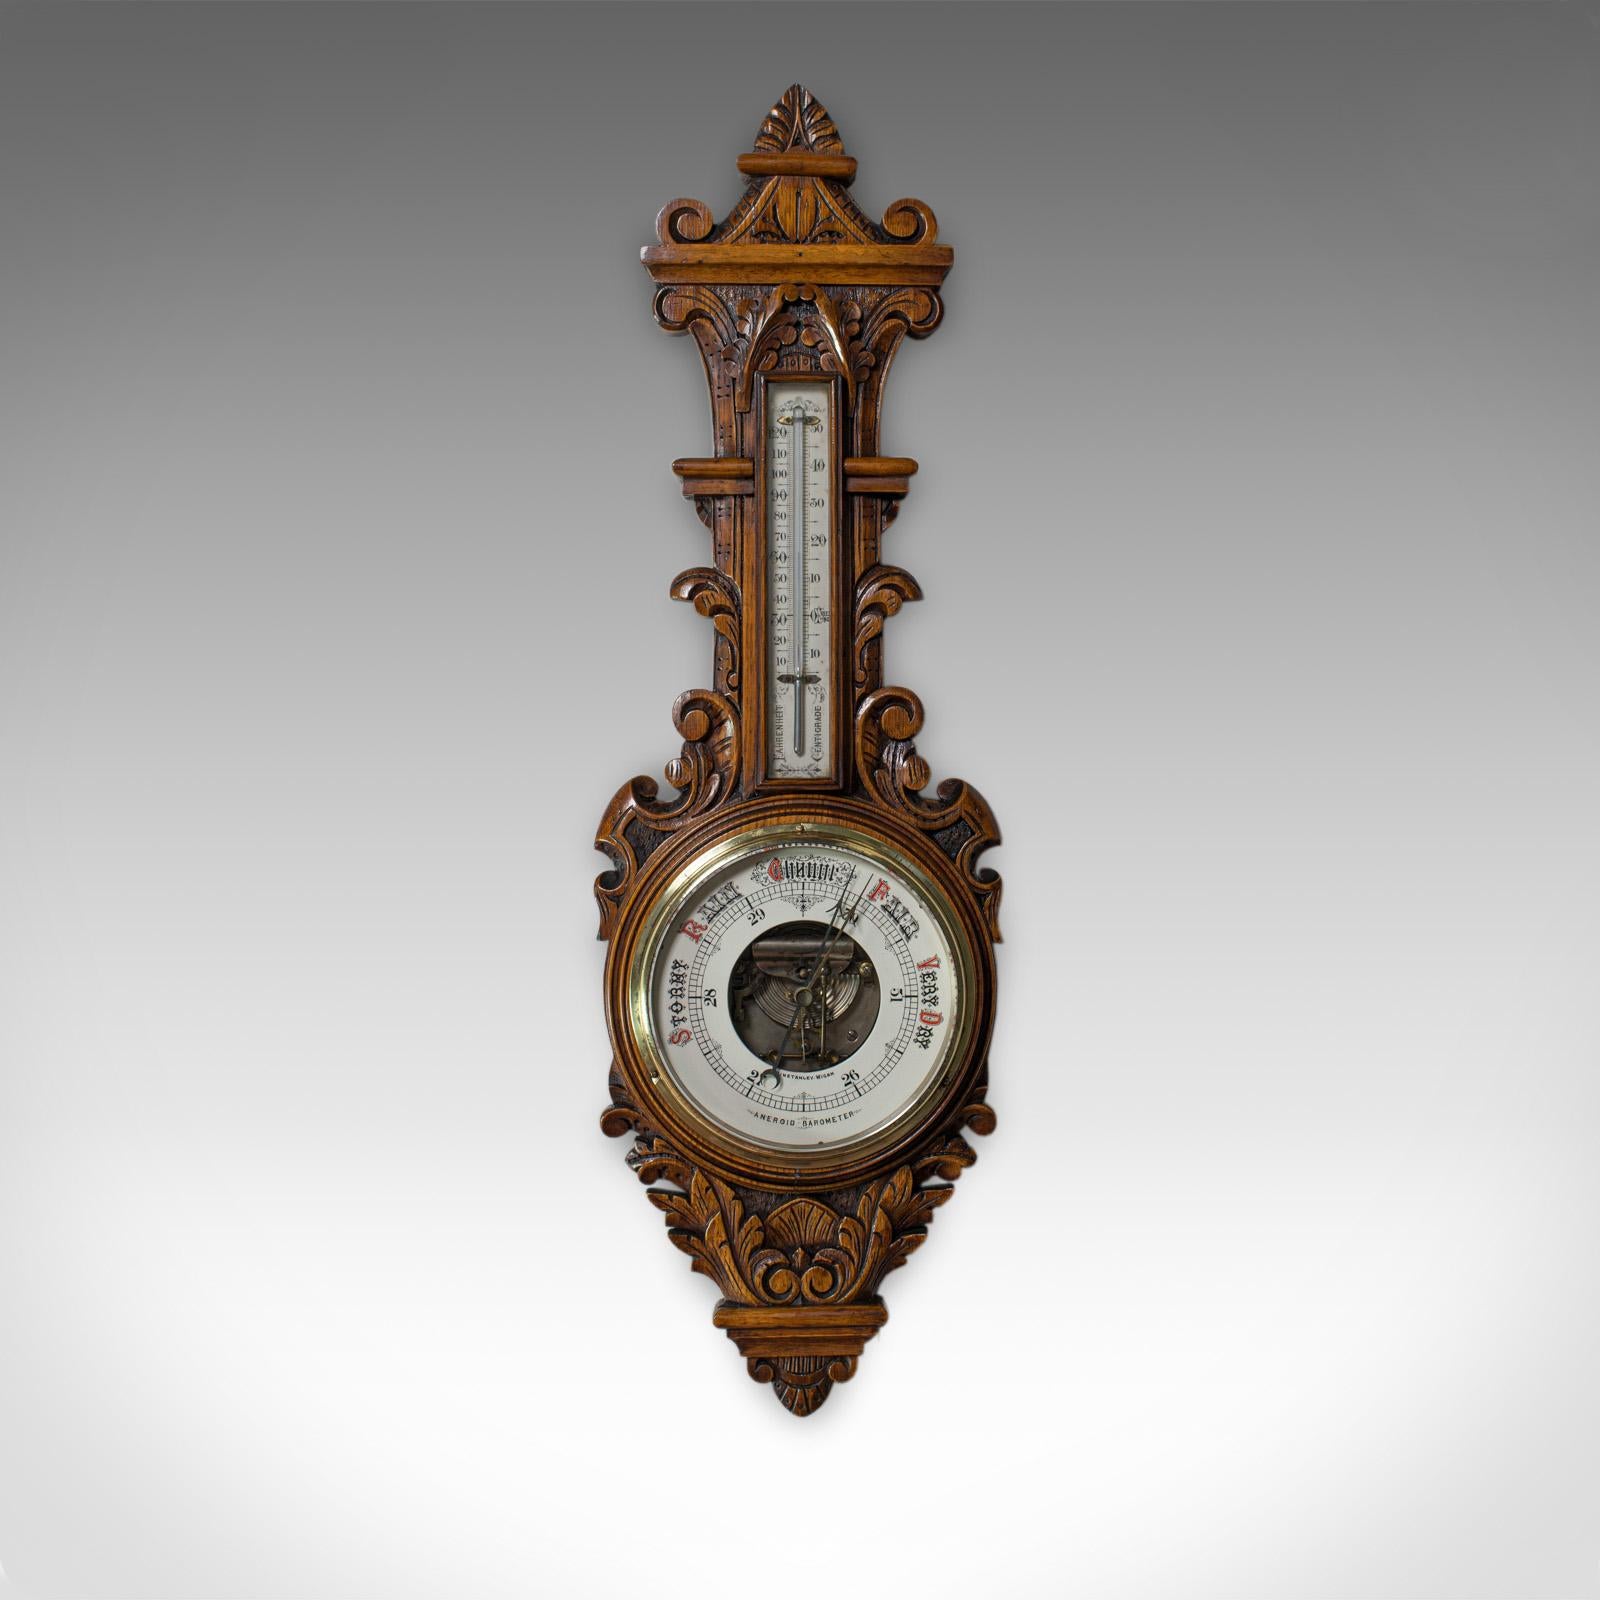 This is an antique aneroid barometer. An English, Winstanley of Wigan, oak banjo barometer with temperature scale dating to the late 19th century, circa 1880.

Attractive banjo barometer by Winstanley of Wigan
Select oak displays a desirable aged